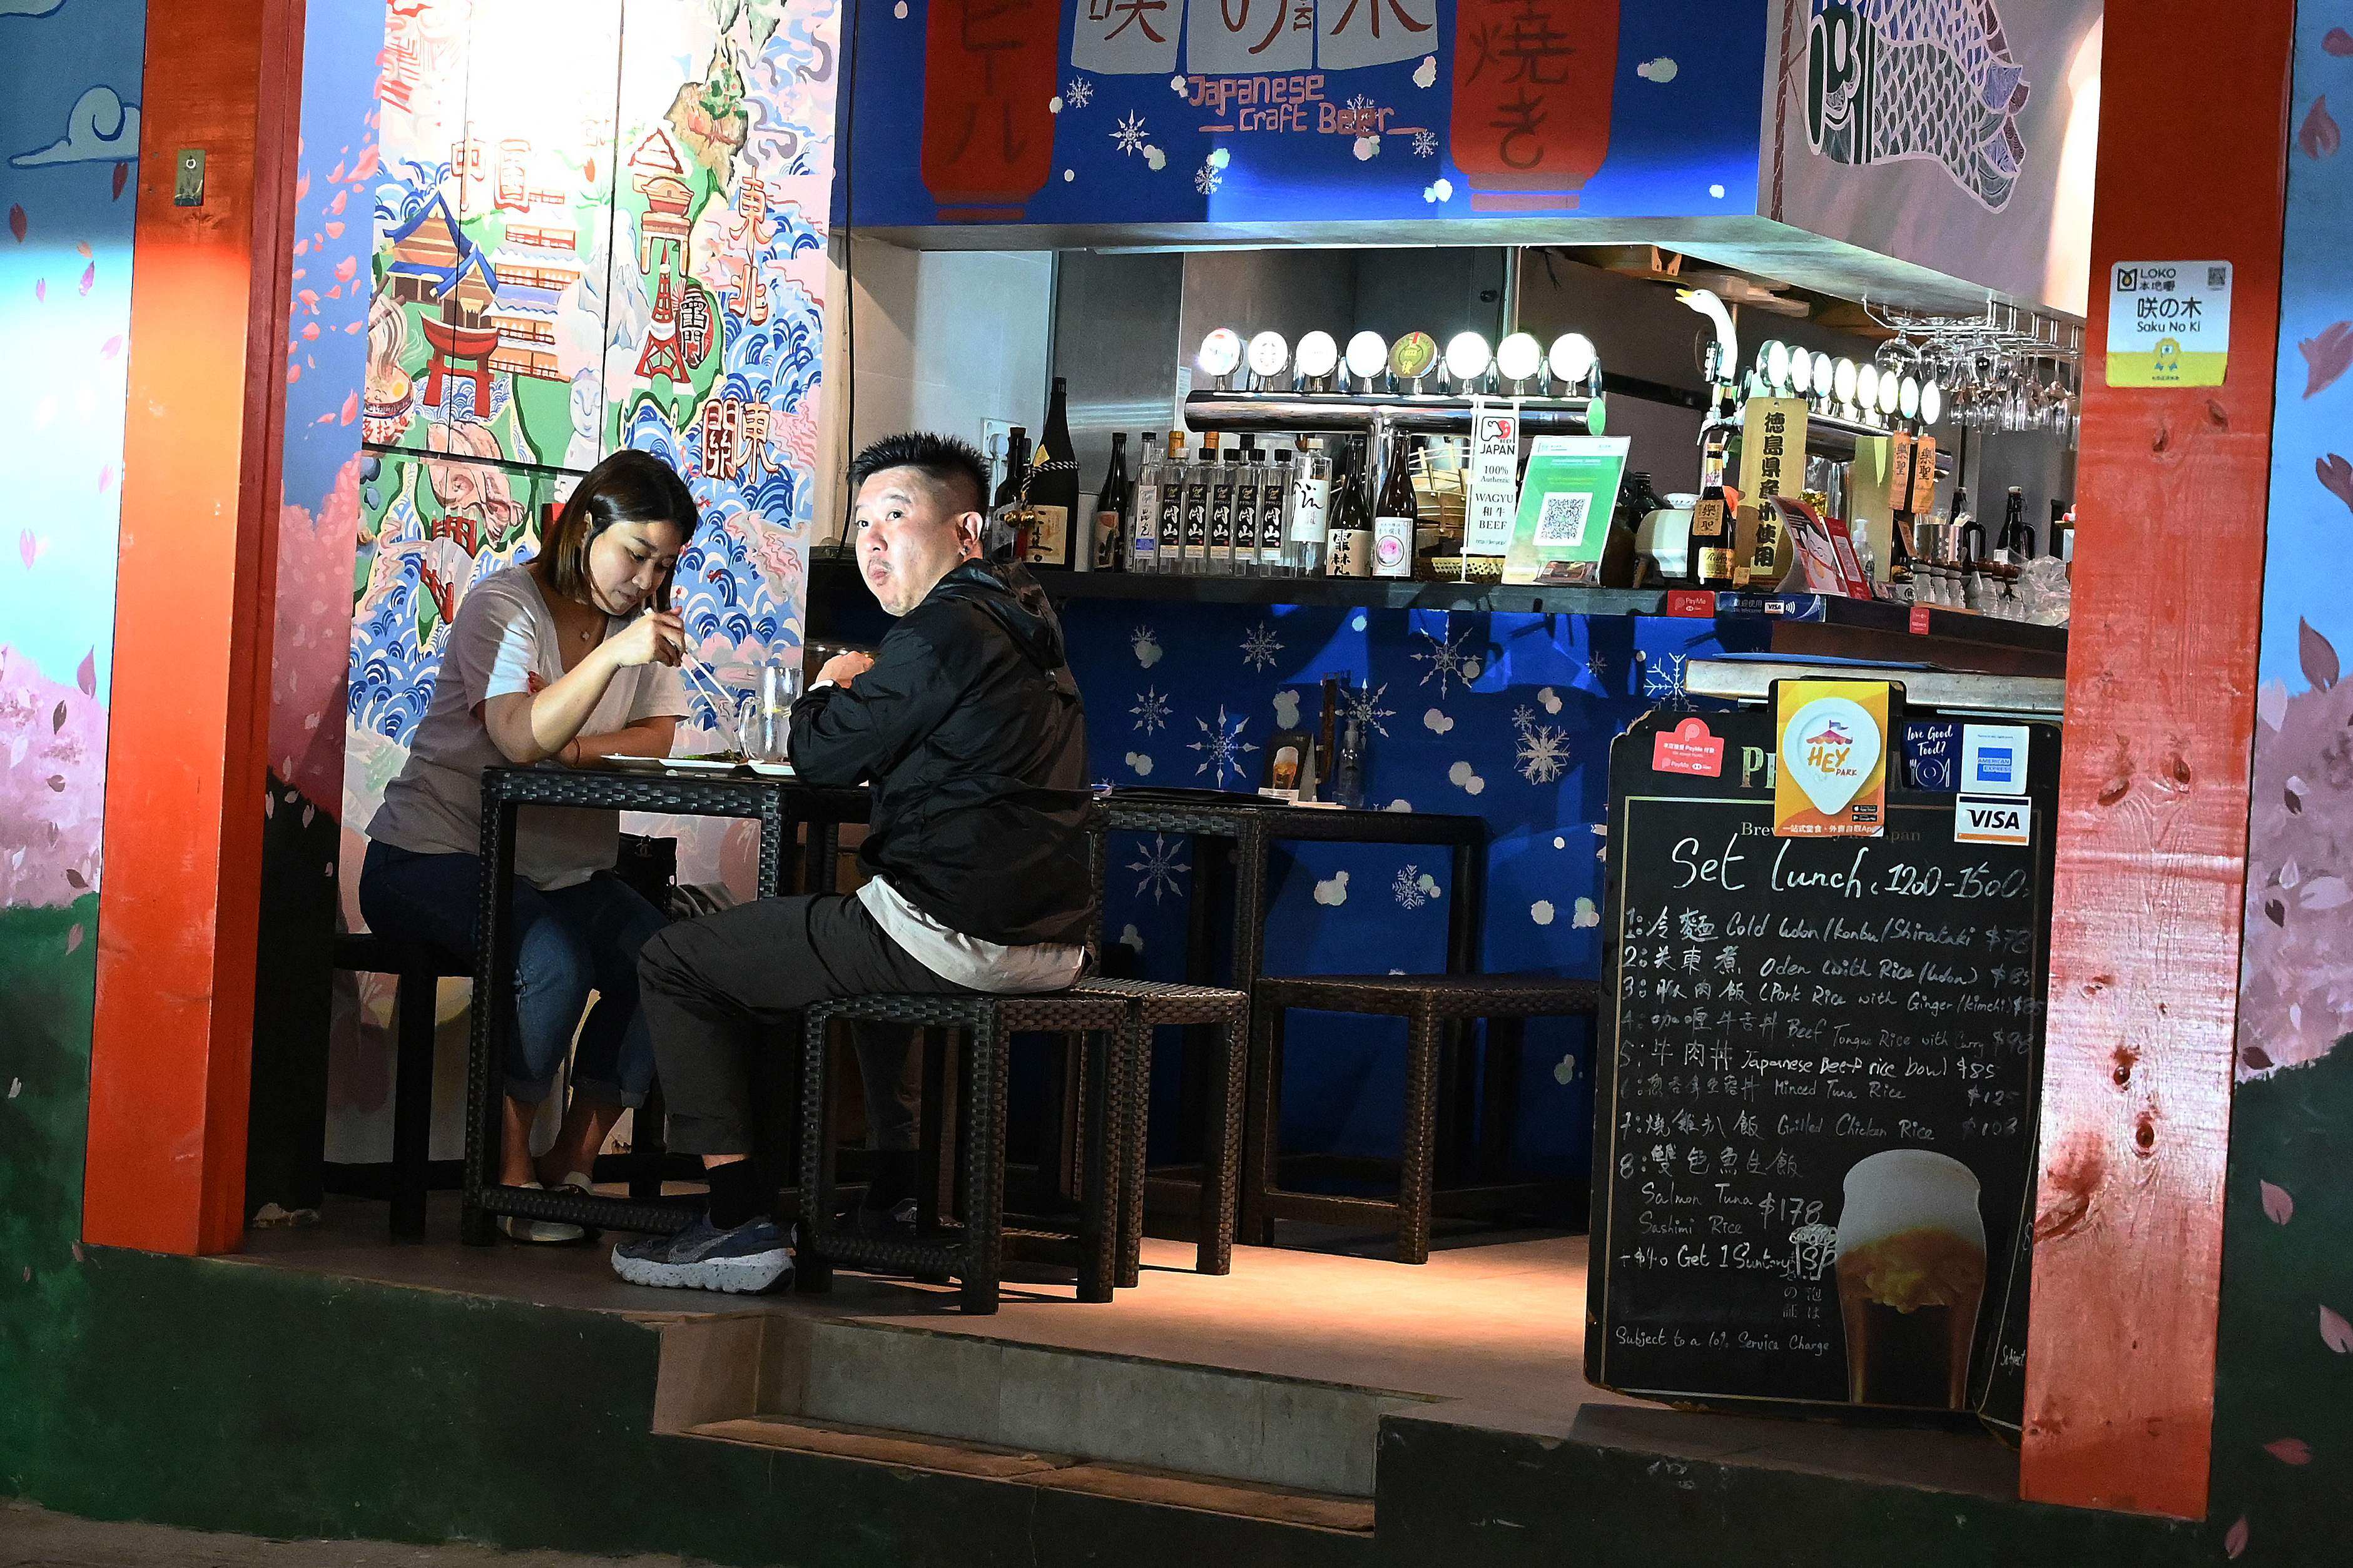 Hong Kong has banned dine-in at restaurants from 6pm since January 7 as part of strict anti-coronavirus measures to curb the spread of the Omicron variant. Photo: AFP